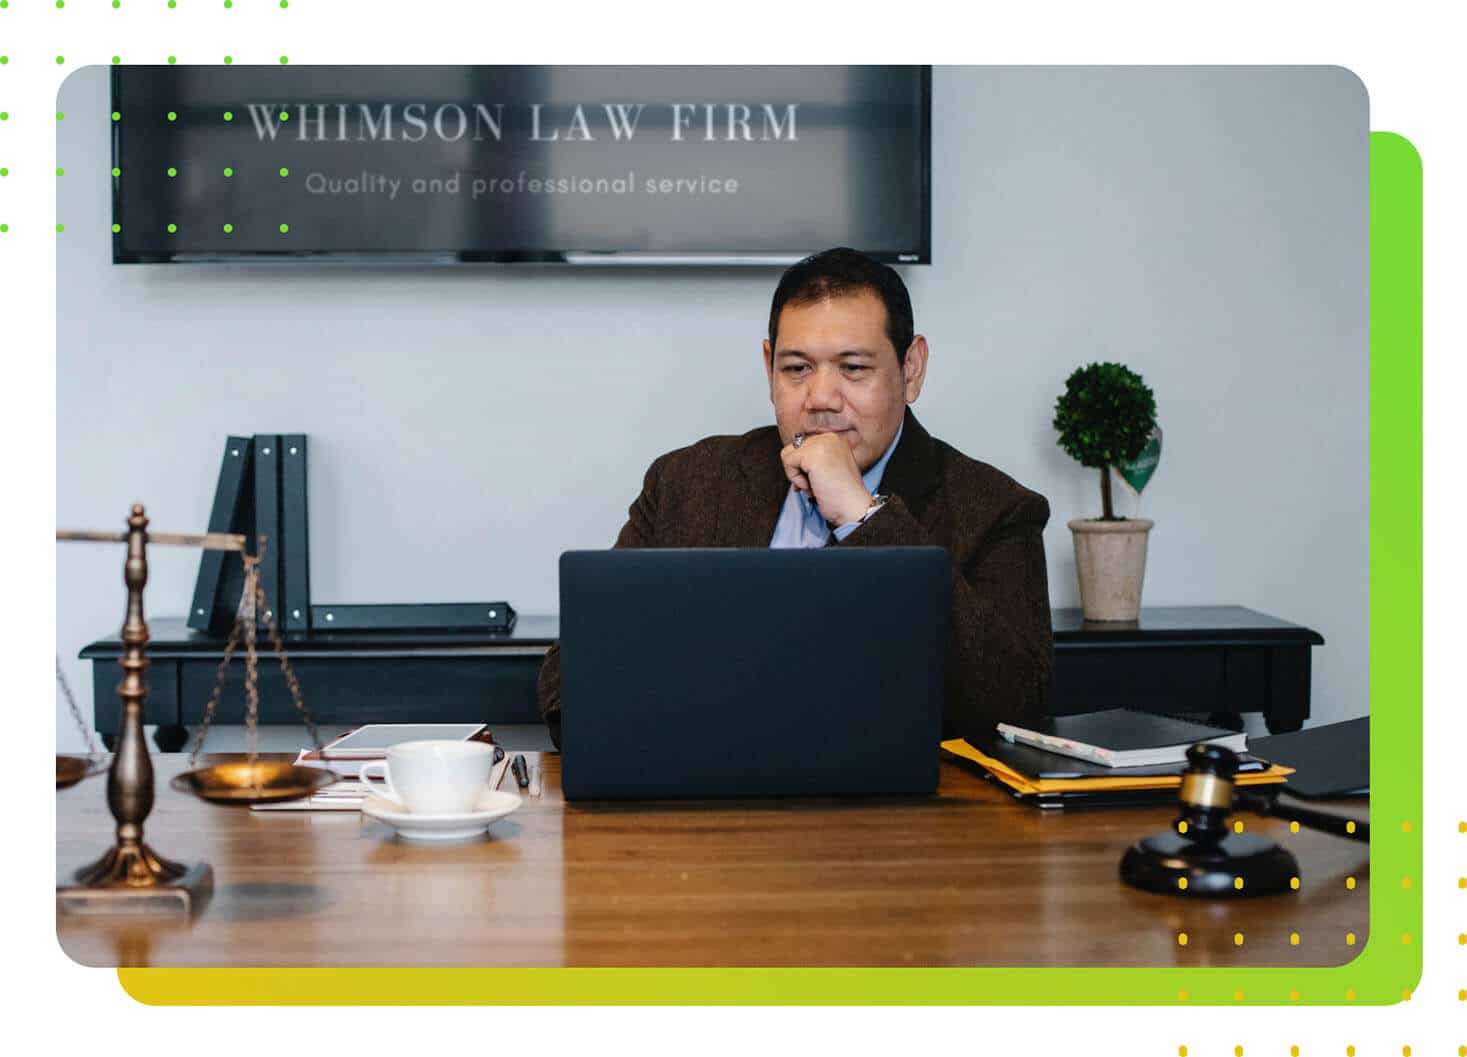 A lawyer staring at a laptop